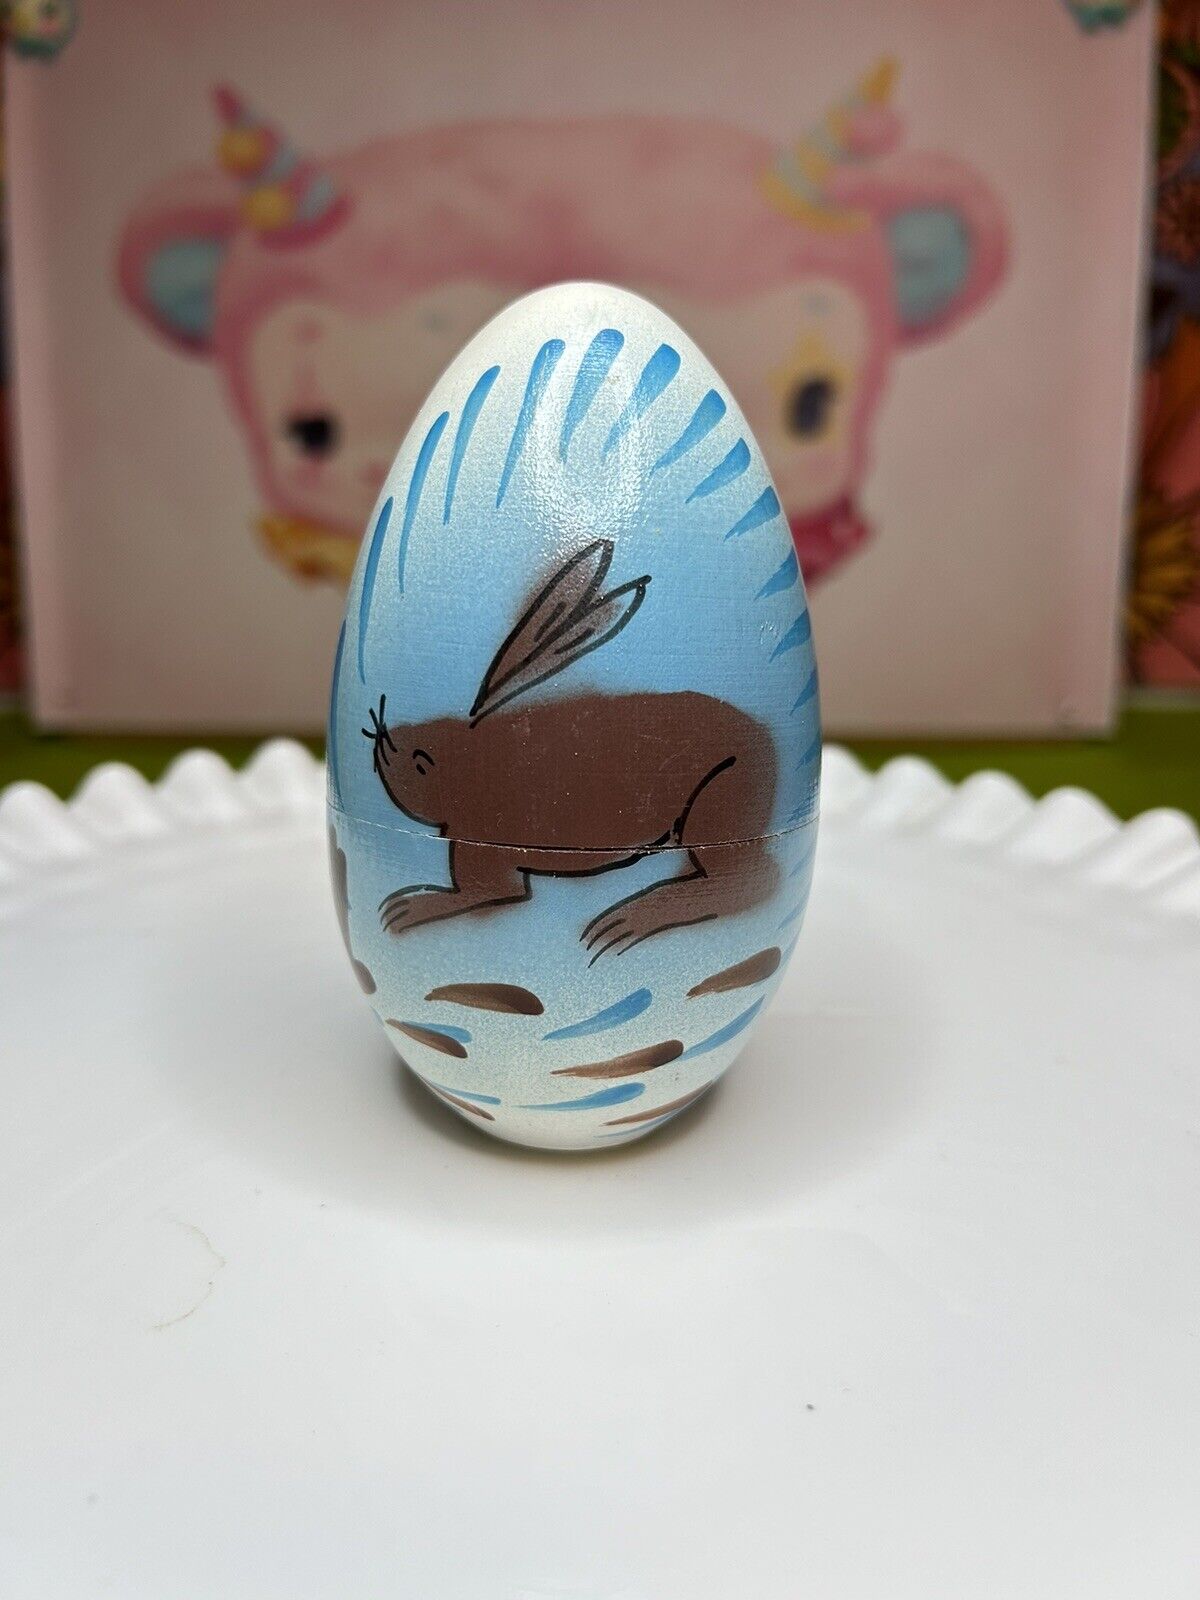 Vintage Hand Painted Egg Shaped Wooden Trinket Box - Made In Poland